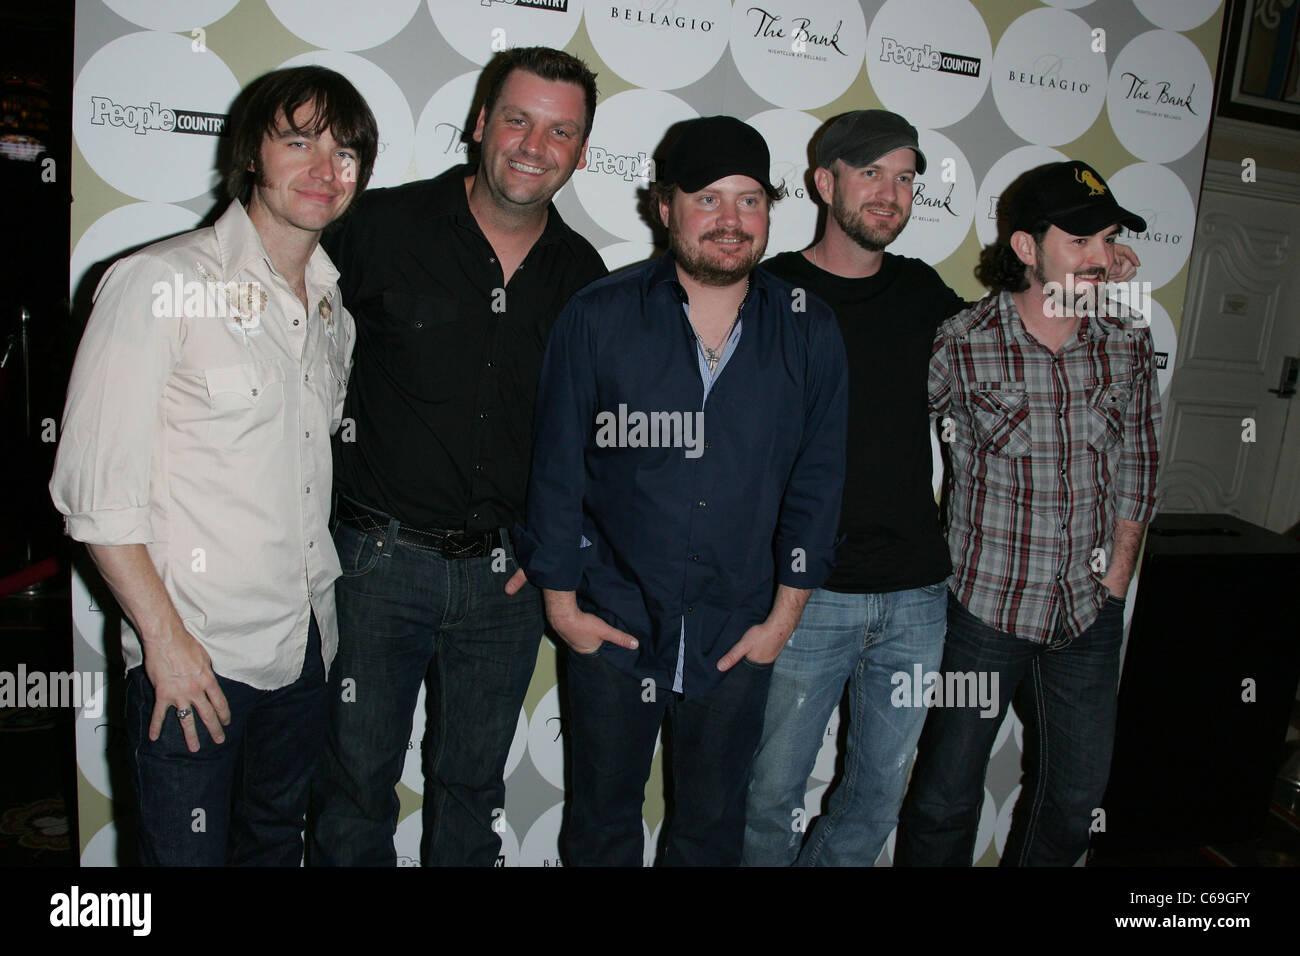 Jon Richardson, Les Lawless, Randy Rogers, Geoffrey Hill, Brady Black, Randy Rogers Band at arrivals for PEOPLE COUNTRY Celebrates Nashville in Vegas at THE BANK, The Bank Nightclub at the Bellagio Hotel, Las Vegas, NV April 2, 2011. Photo By: James Atoa/Everett Collection Stock Photo